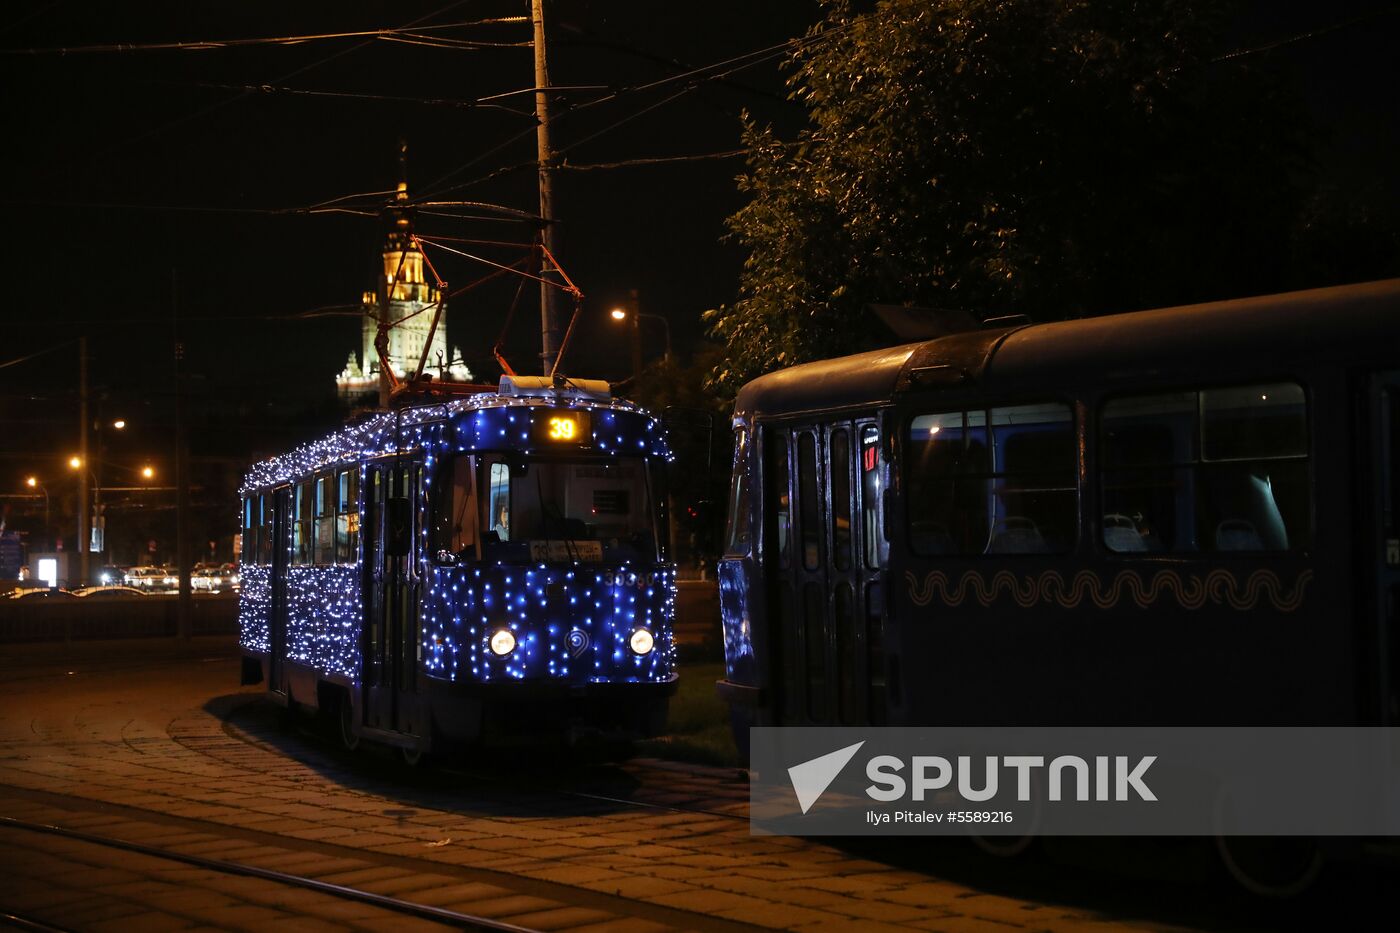 Decorated streetcar for Moscow Transport Day